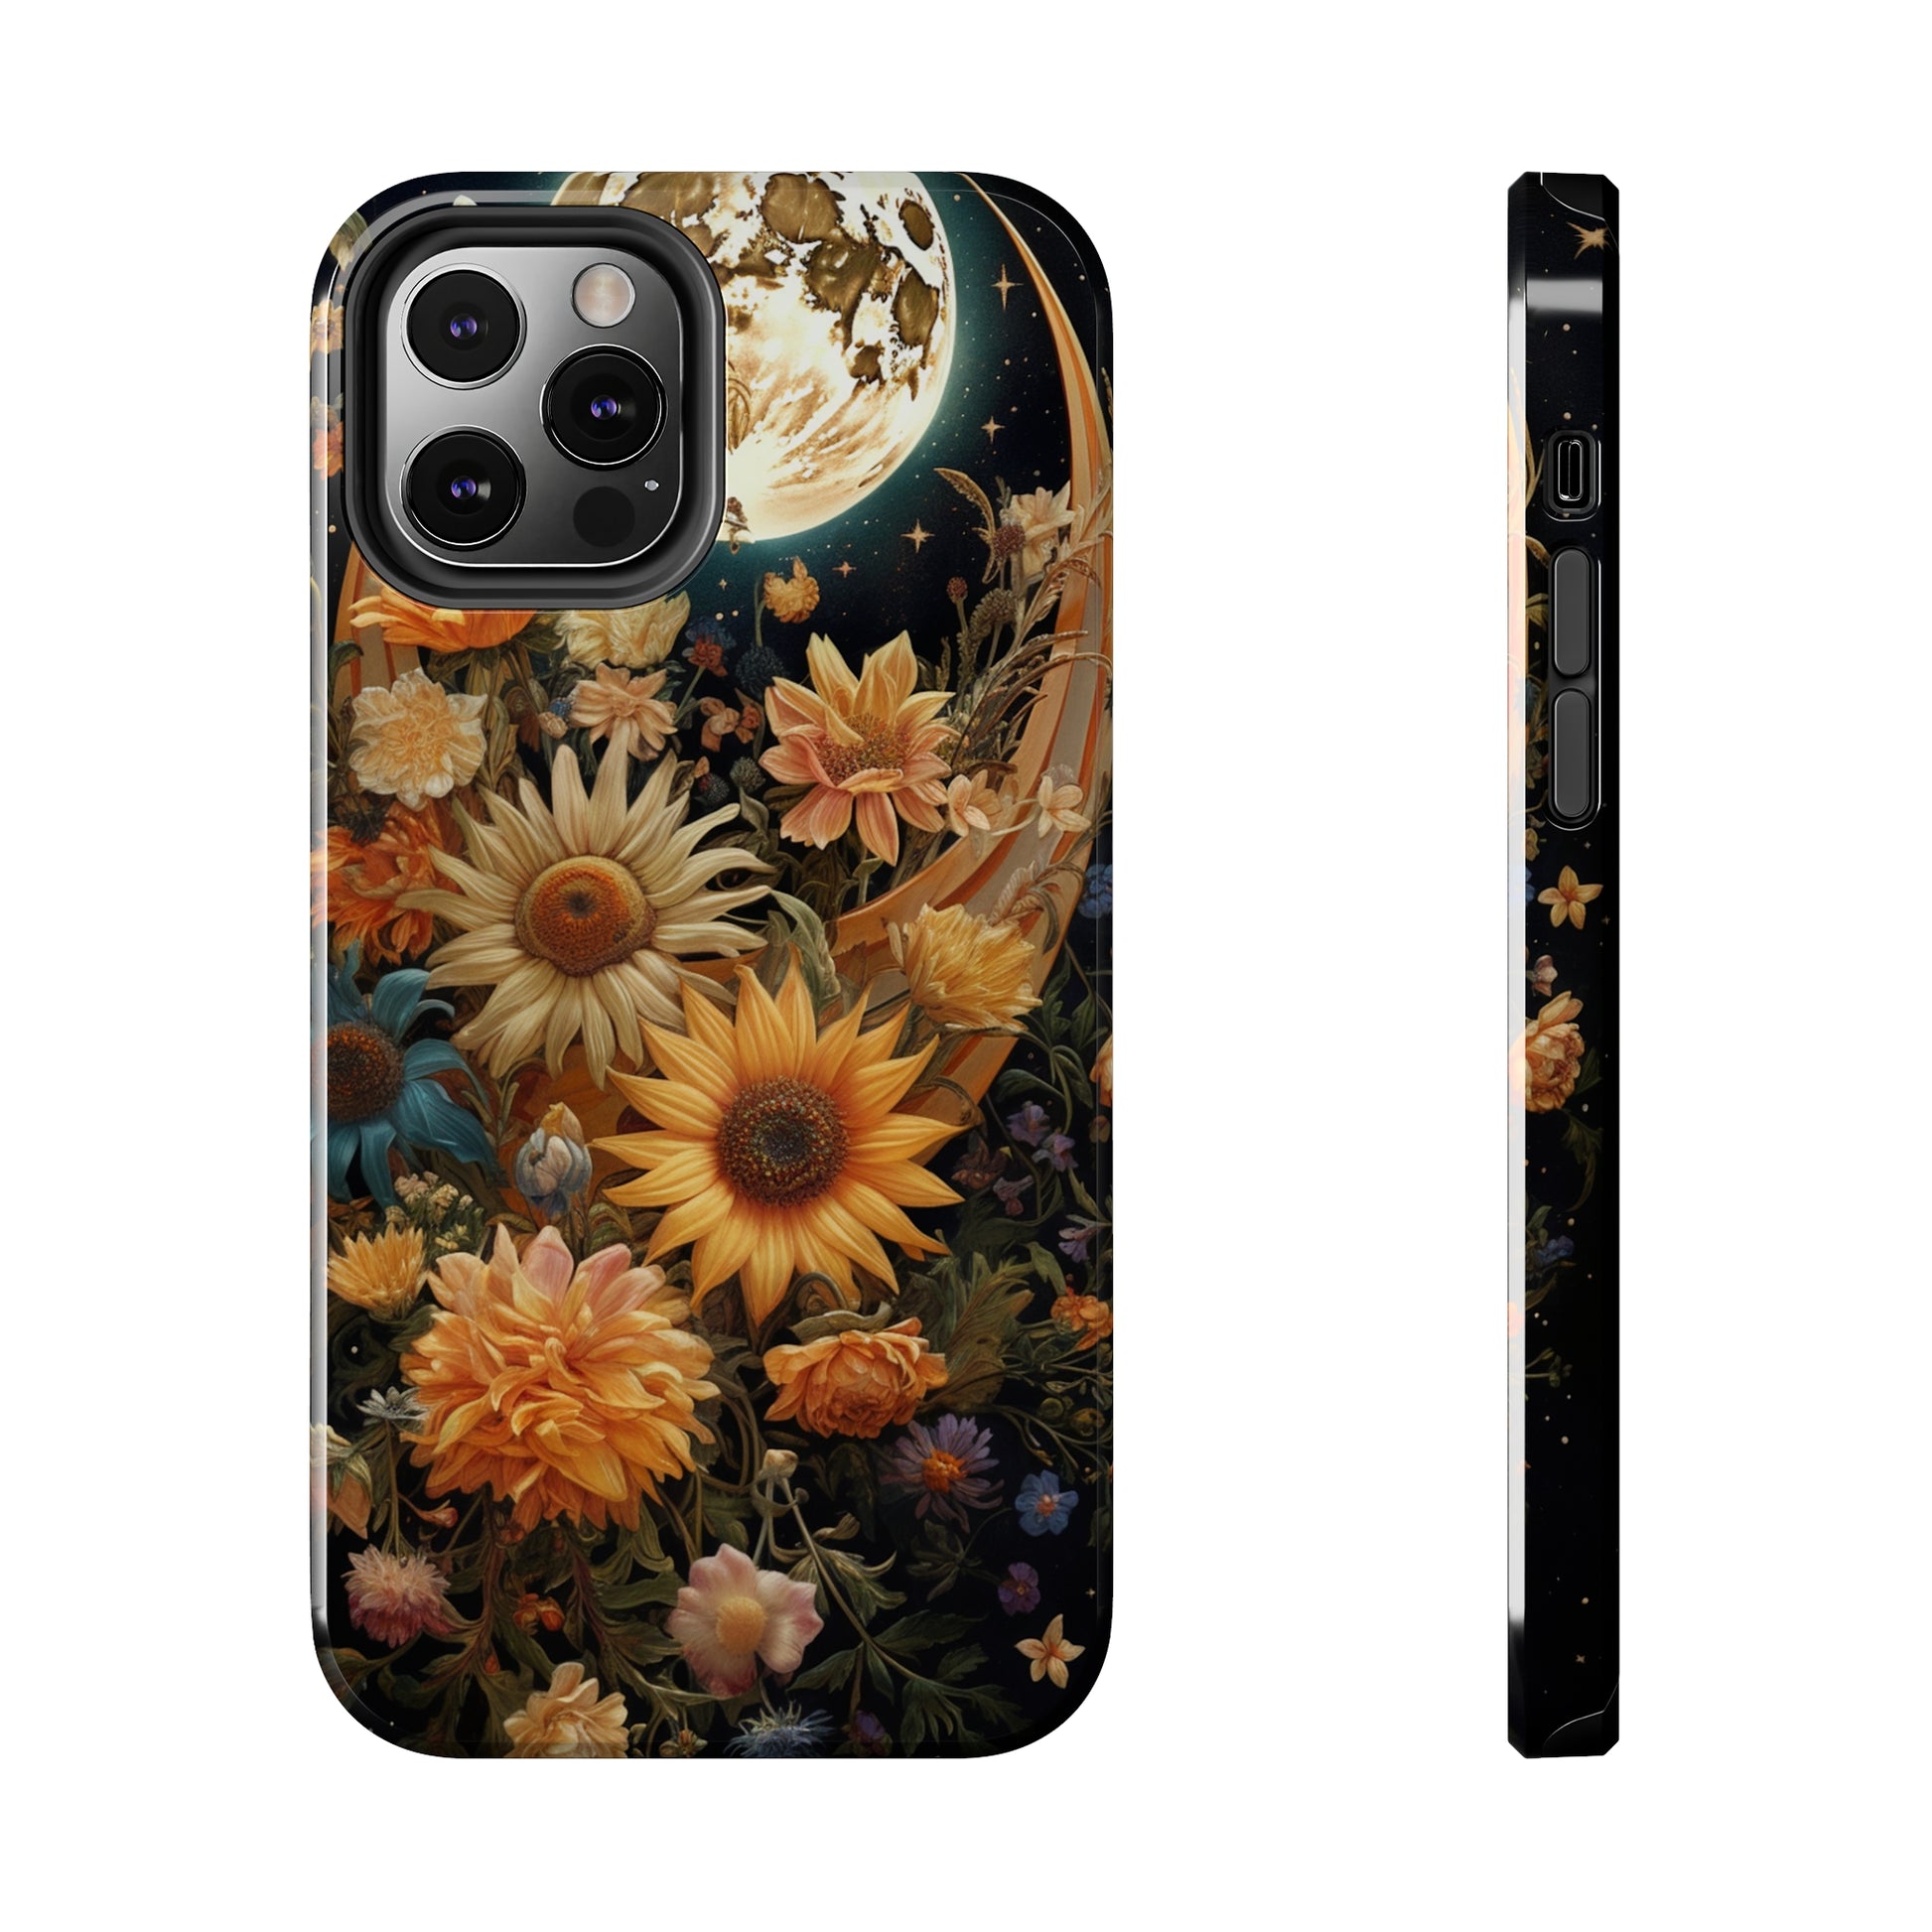 Protective iPhone 11 and 14 case blending nature and cosmos